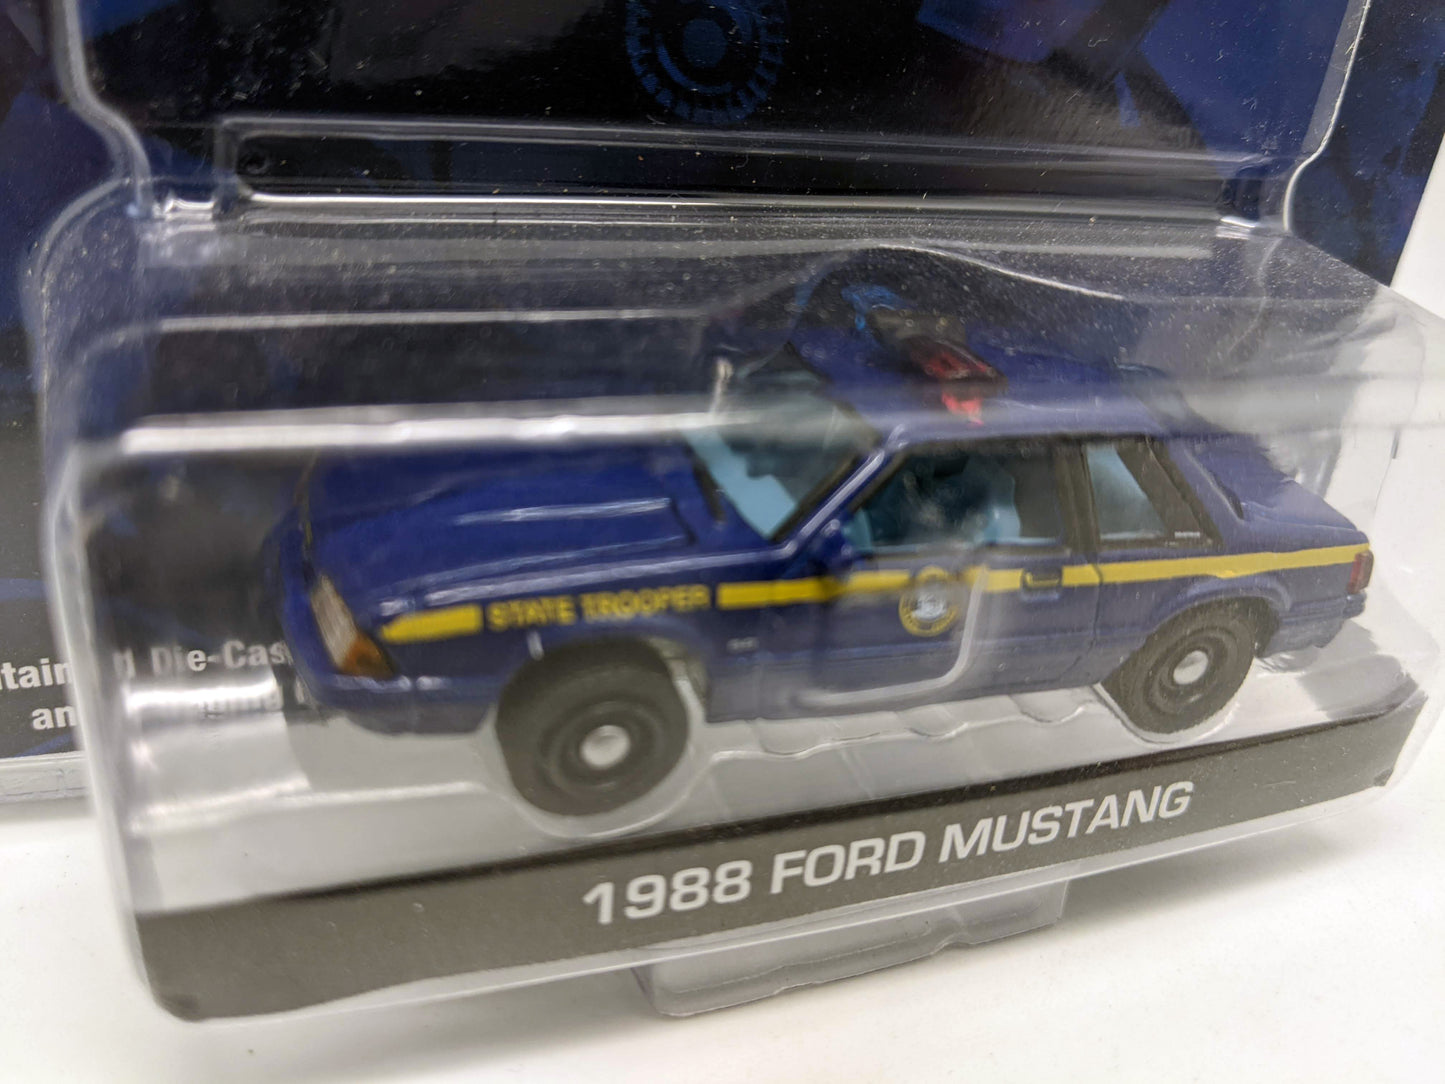 GL - 1988 Ford Mustang - Hot Pursuit New York State Police